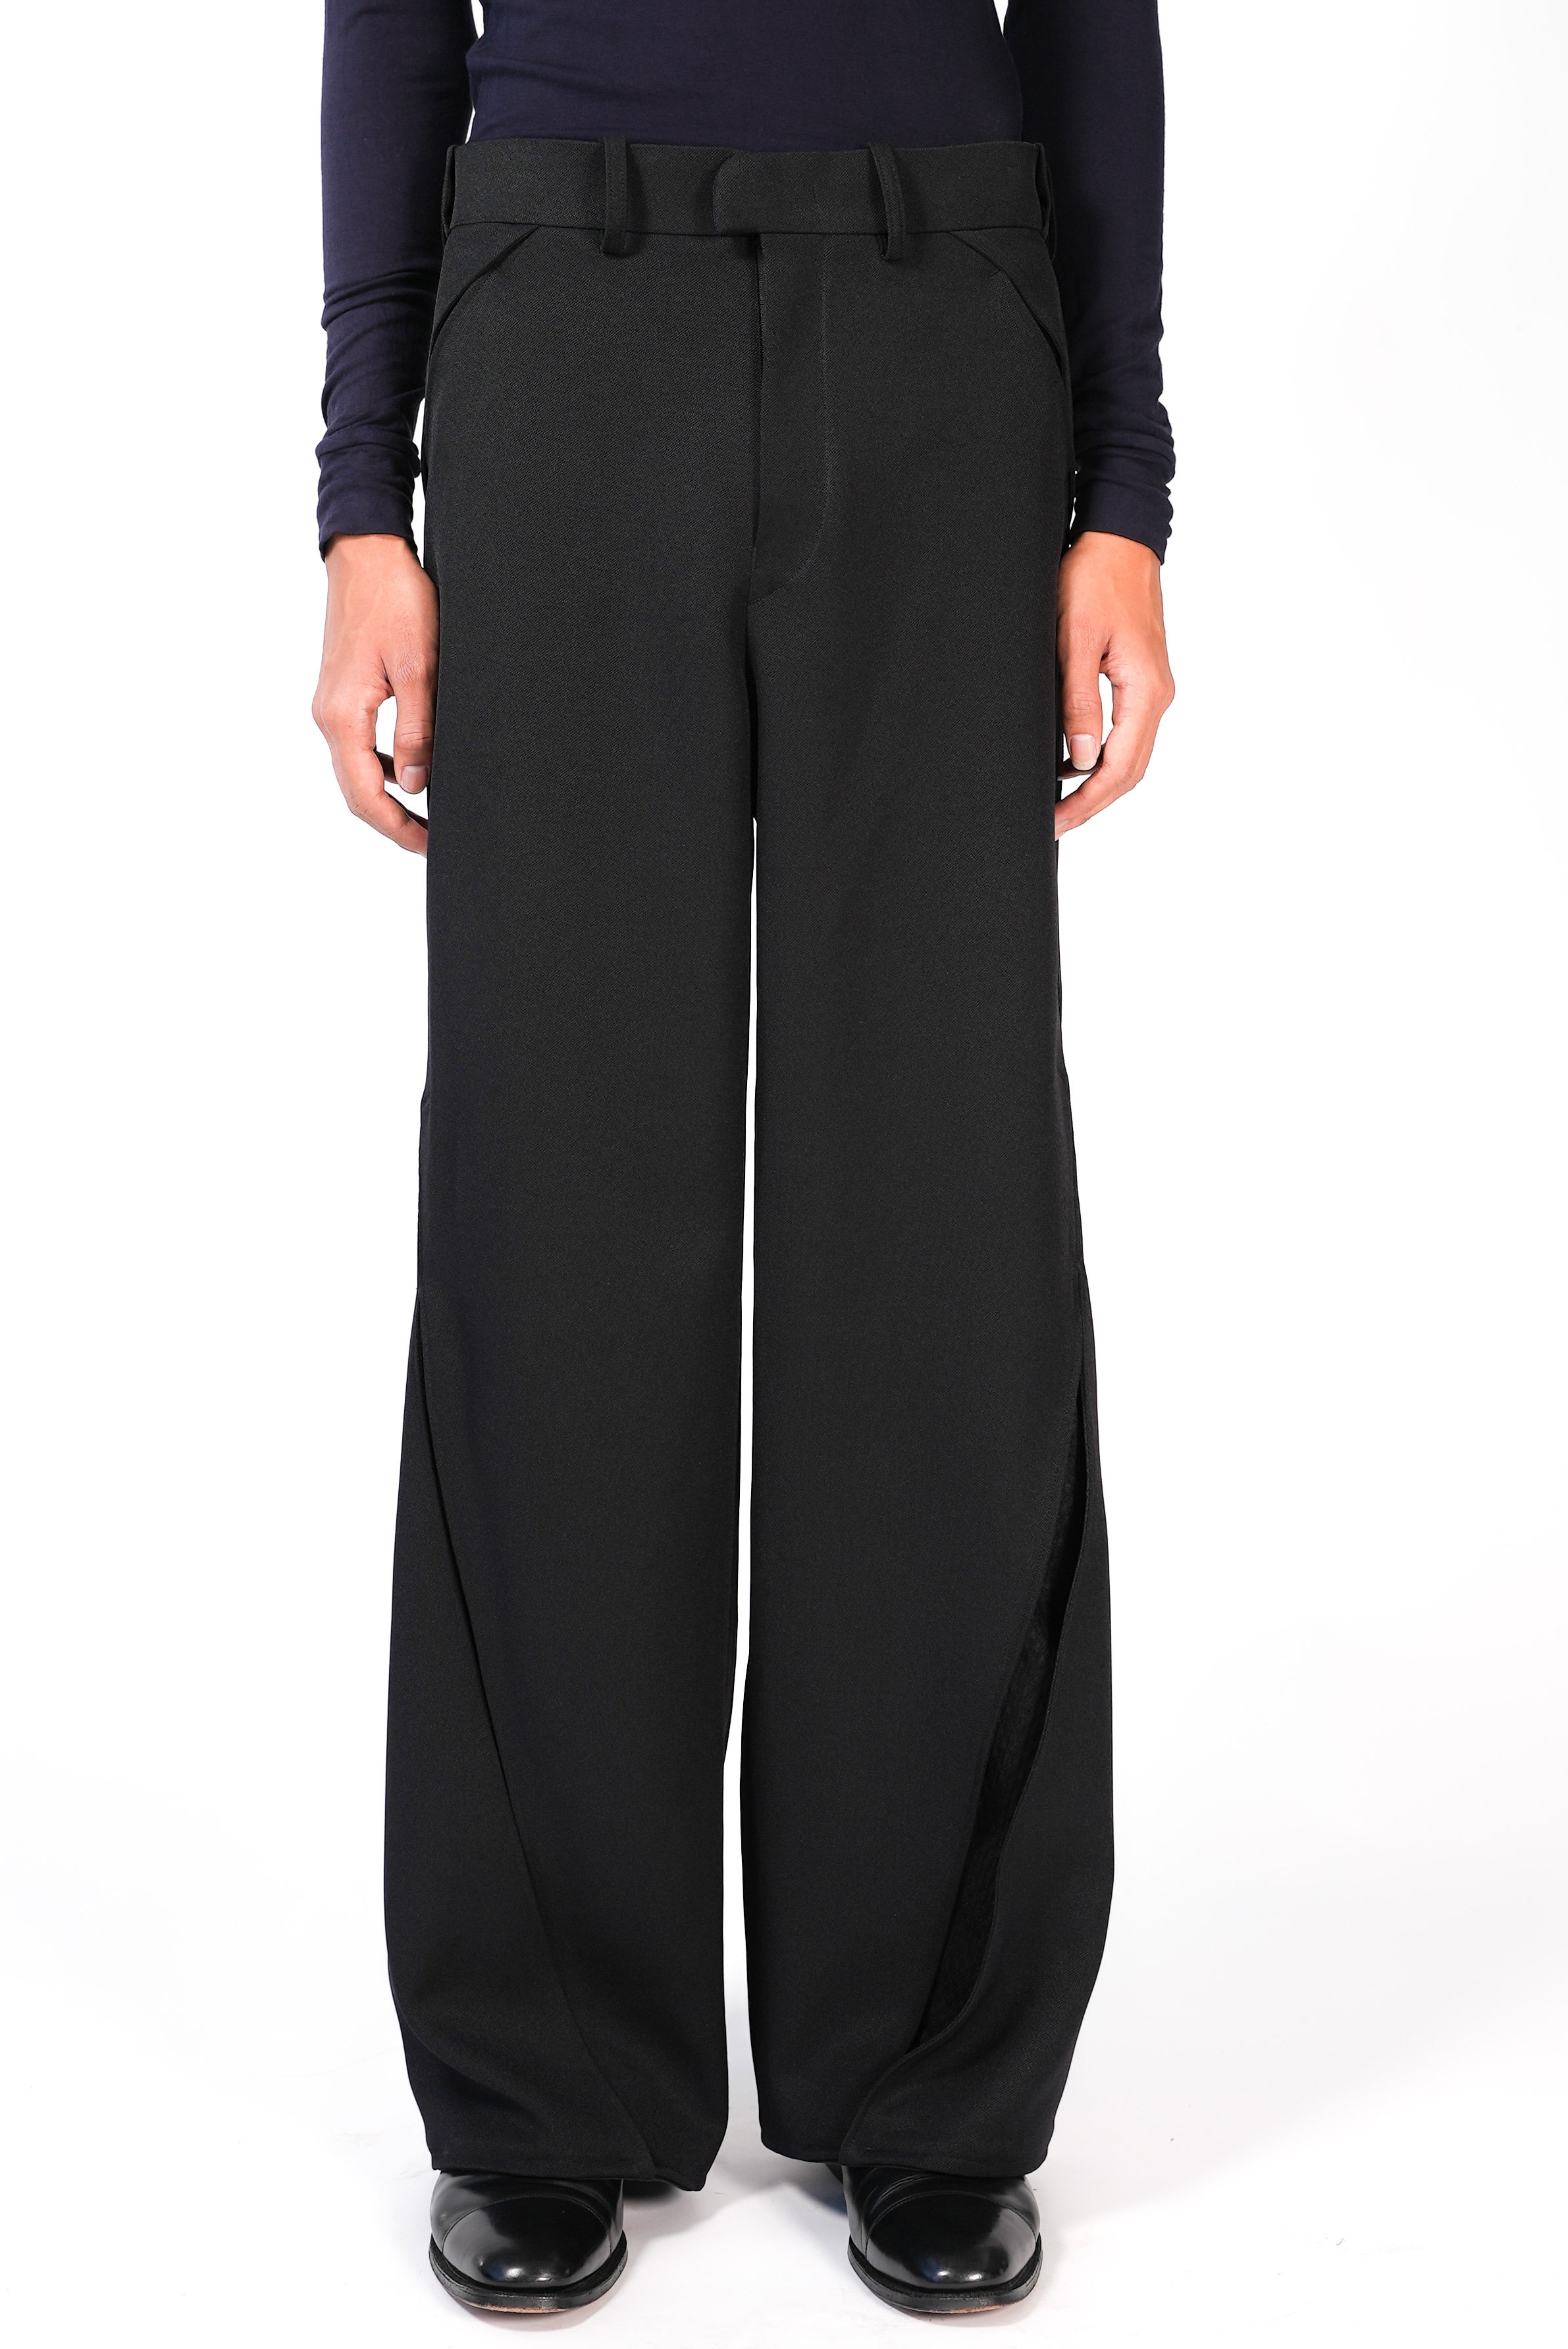 STRONG003 TROUSERS (BLACK) 売り出し最激安 